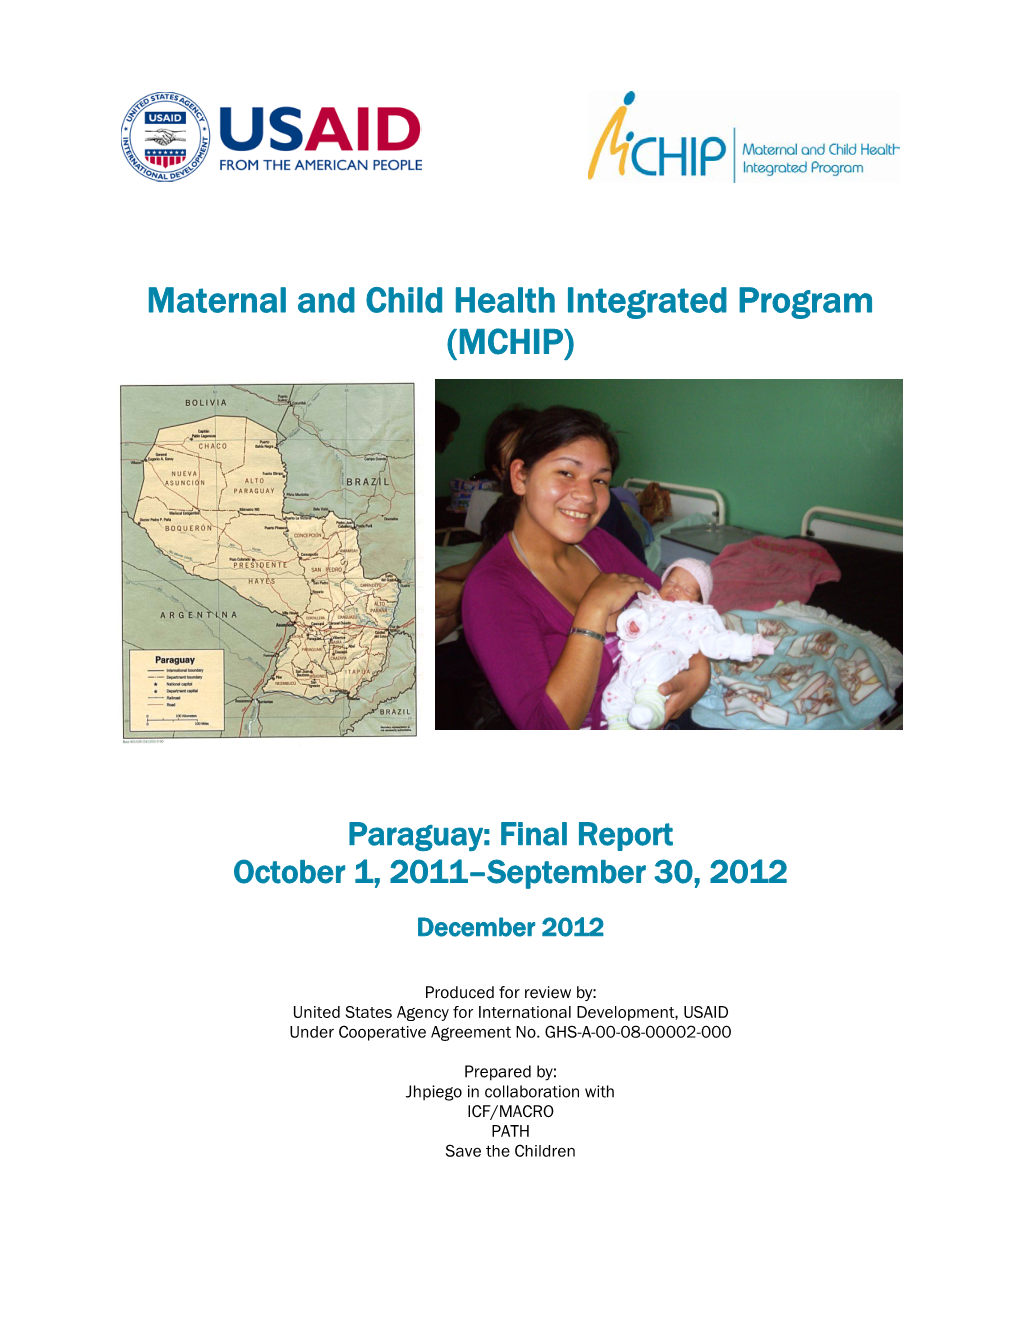 Maternal and Child Health Integrated Program (MCHIP)